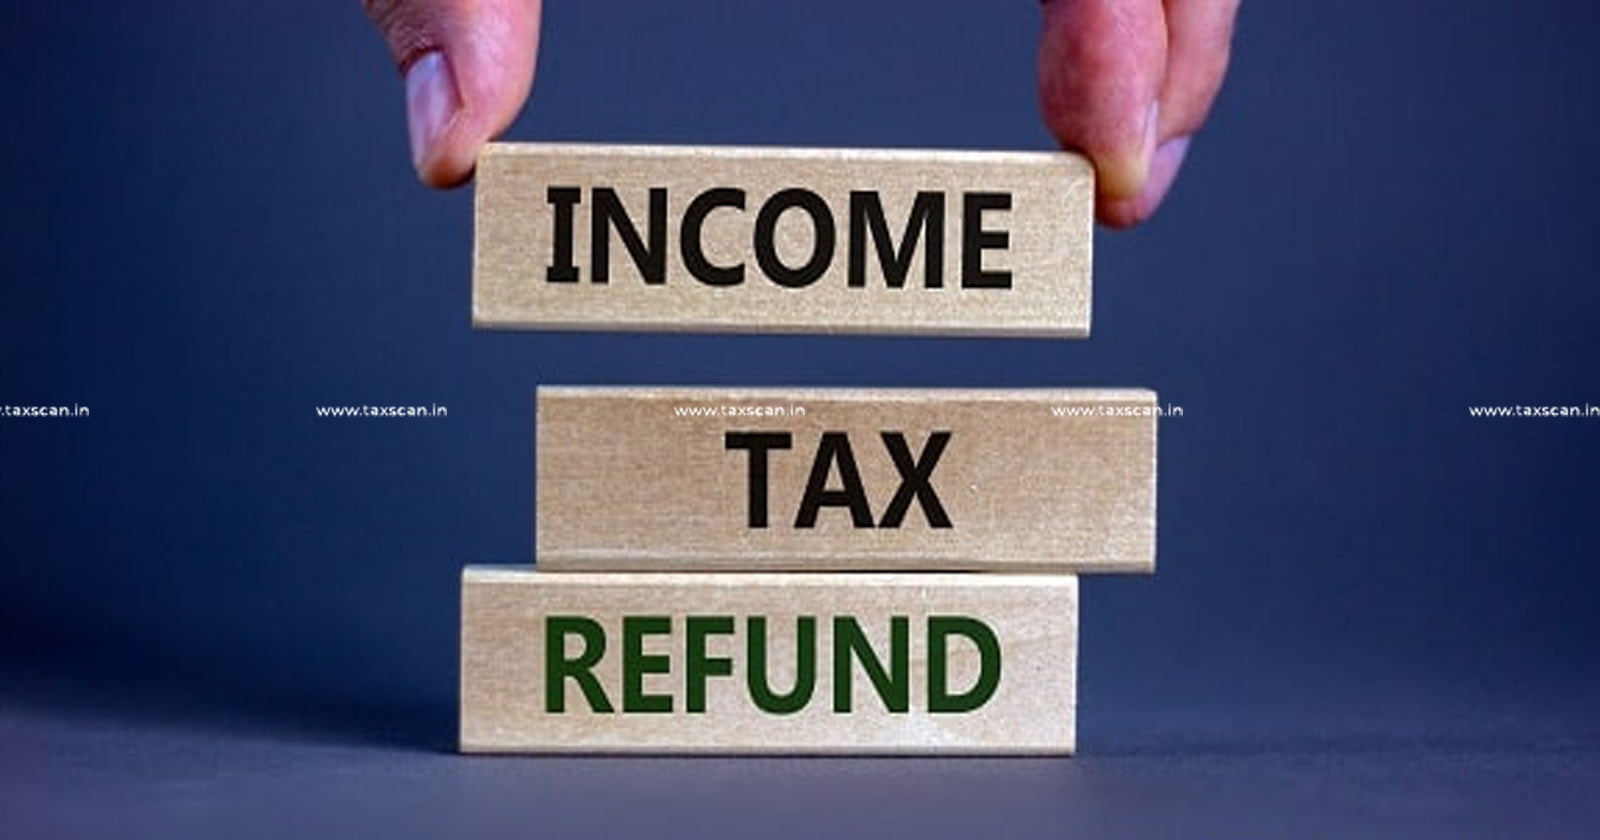 ITR Filing: Neglecting THIS step may cost you income tax refund